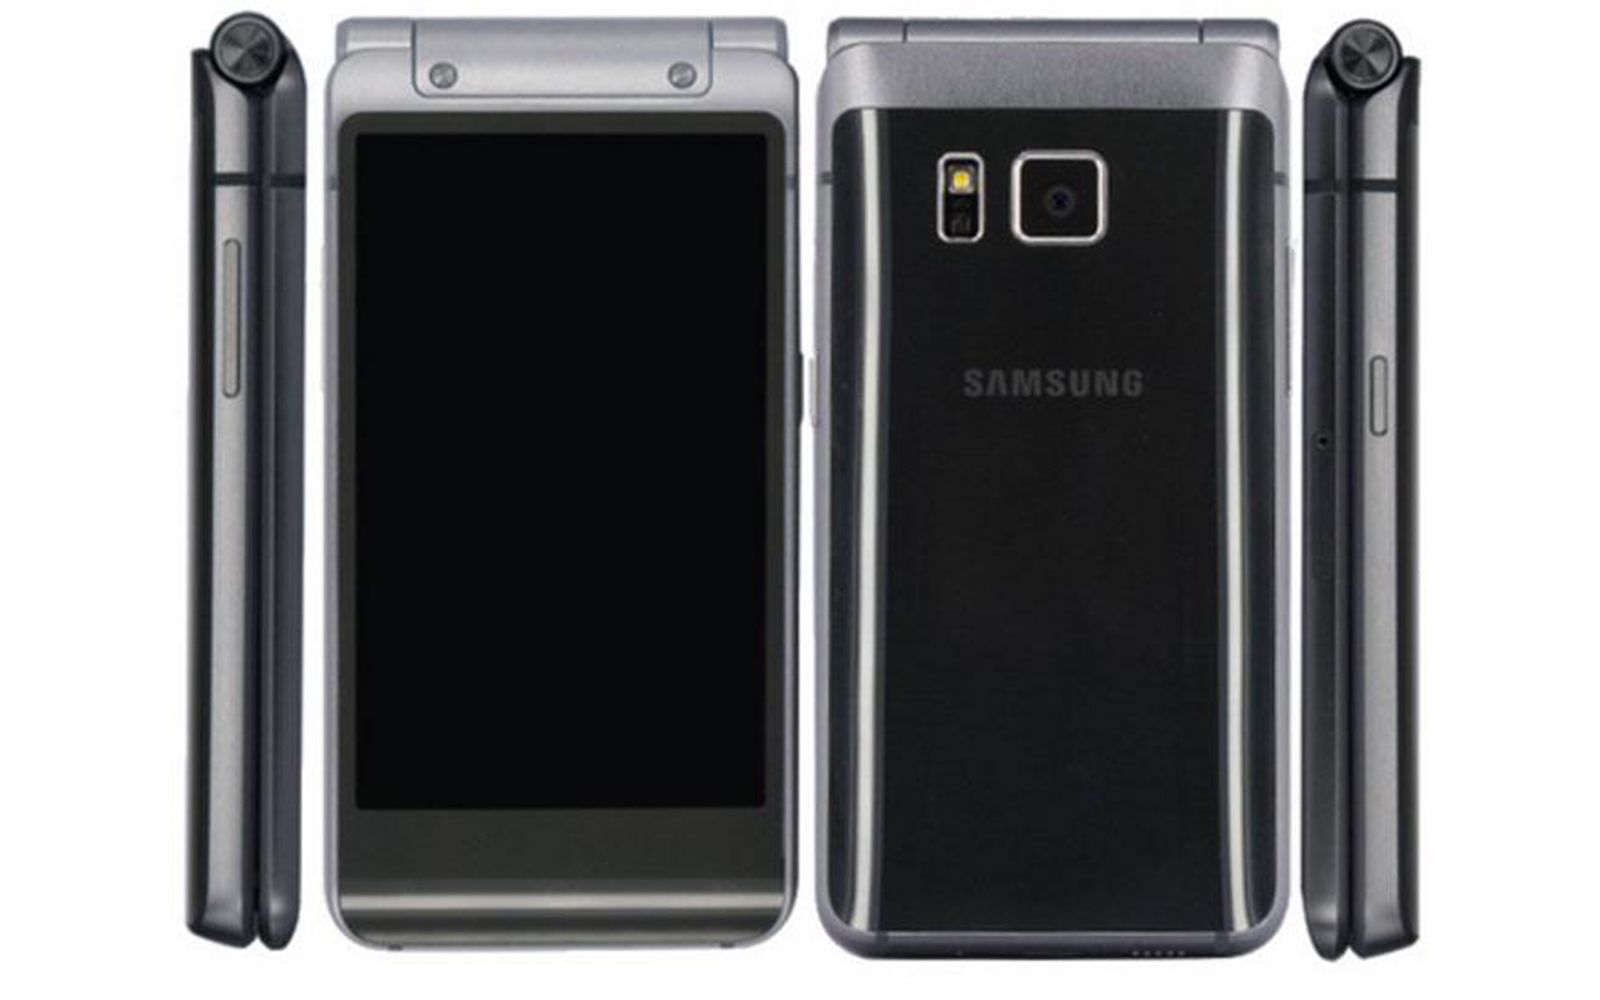 is samsung flipping mad new android clamshell phone leaks image 1